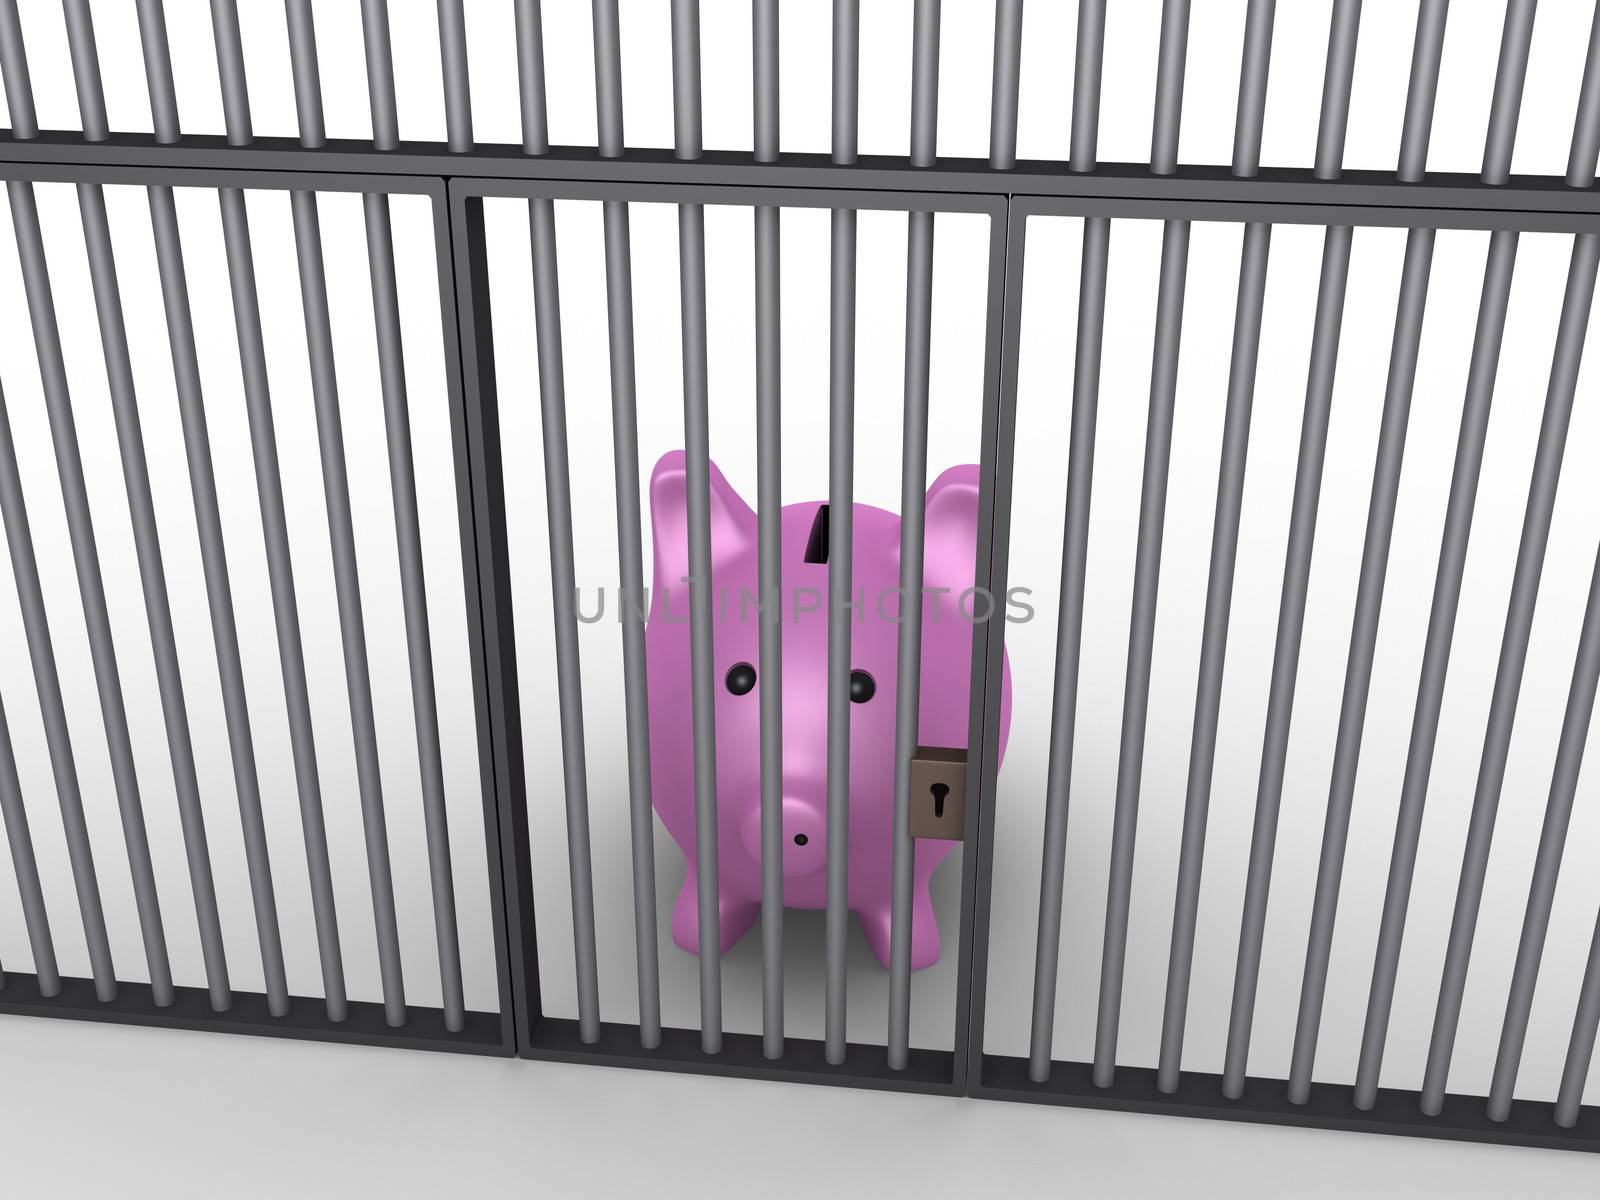 Pig money box in prison by 6kor3dos